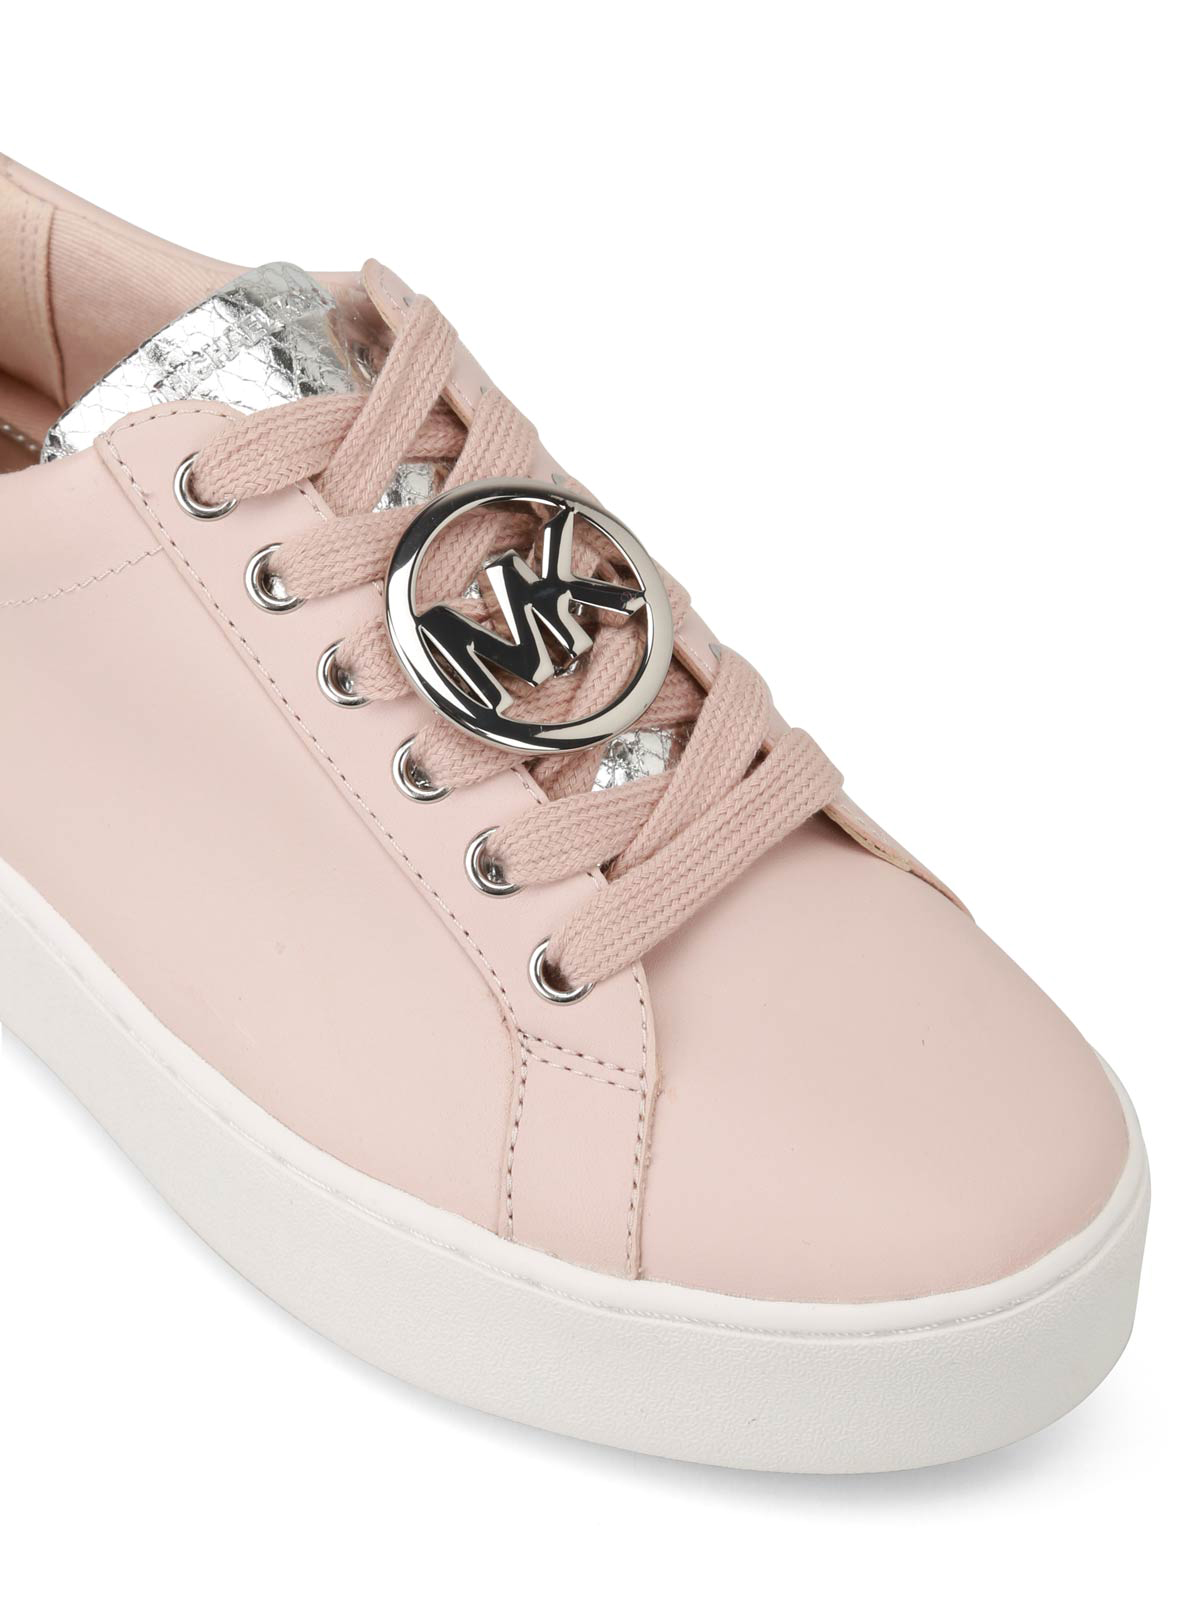 soft pink trainers